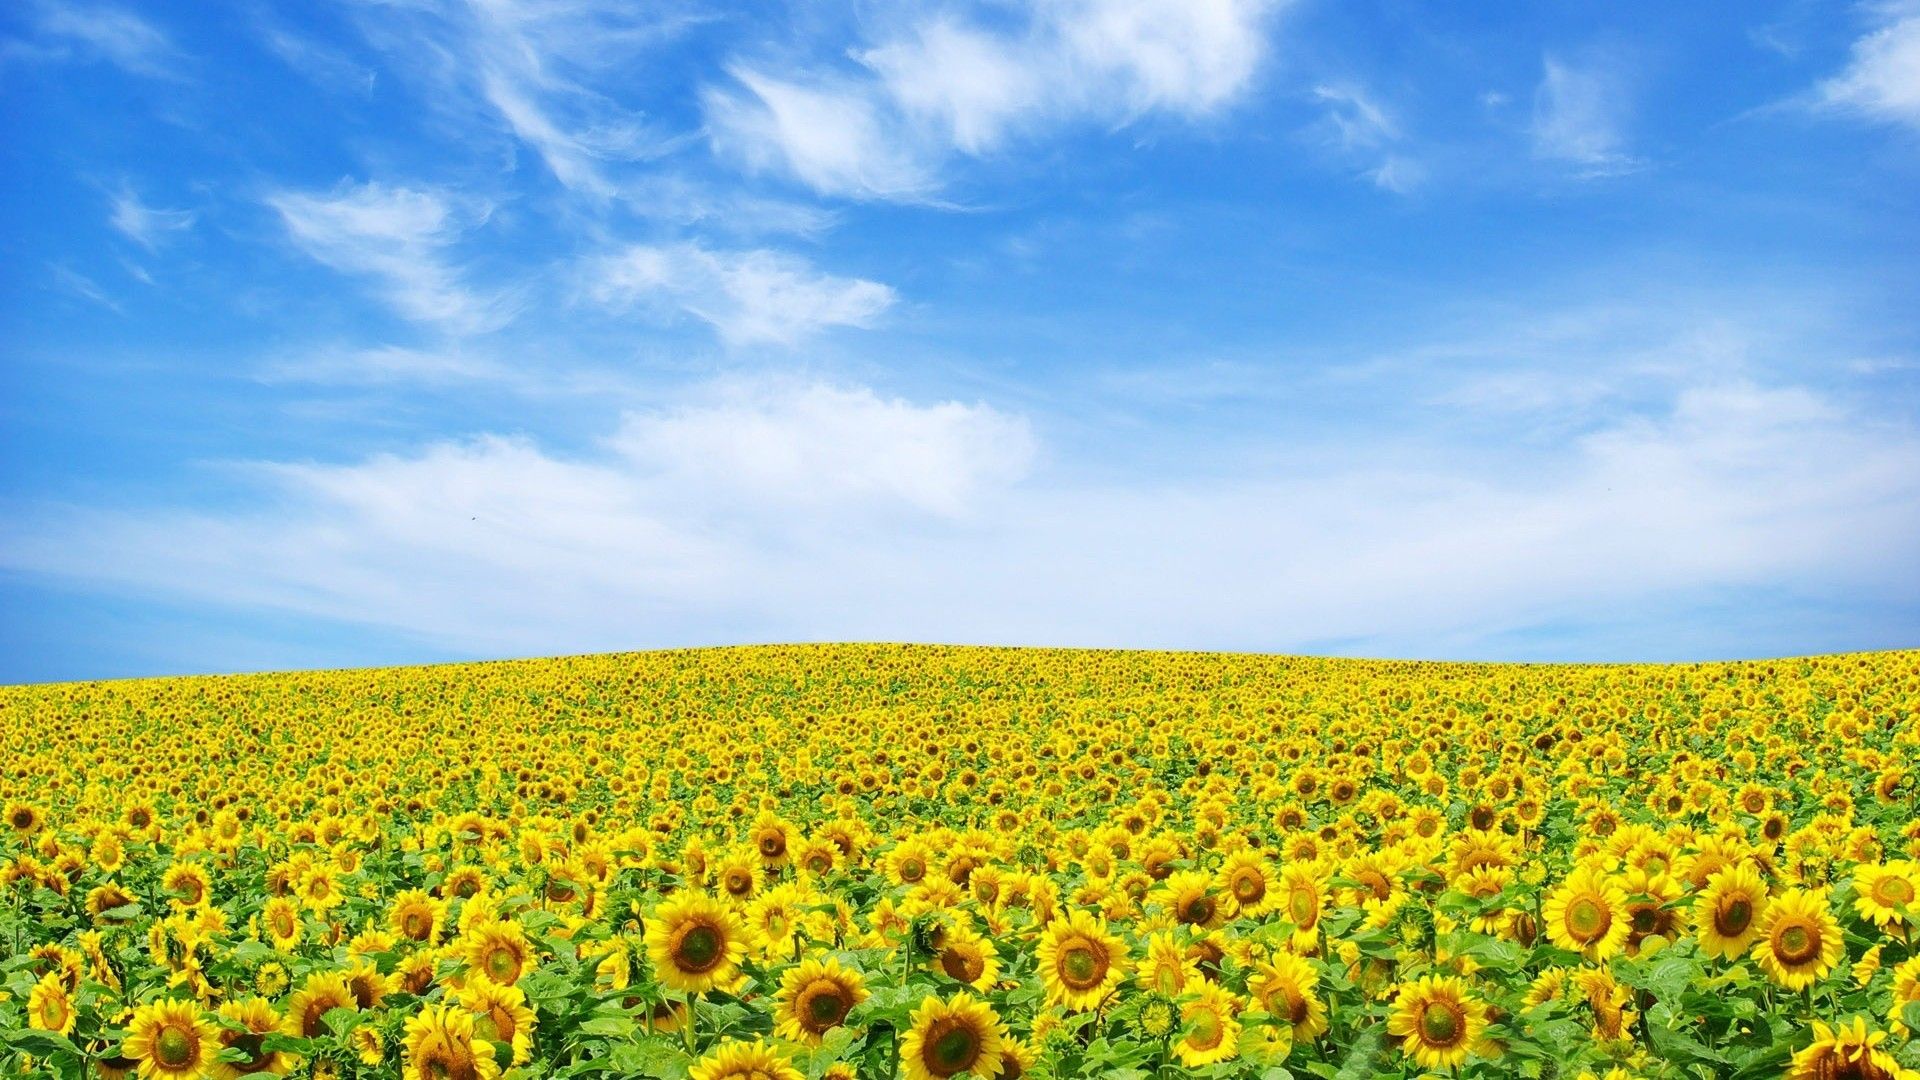 Field of Flowers Wallpaper background picture